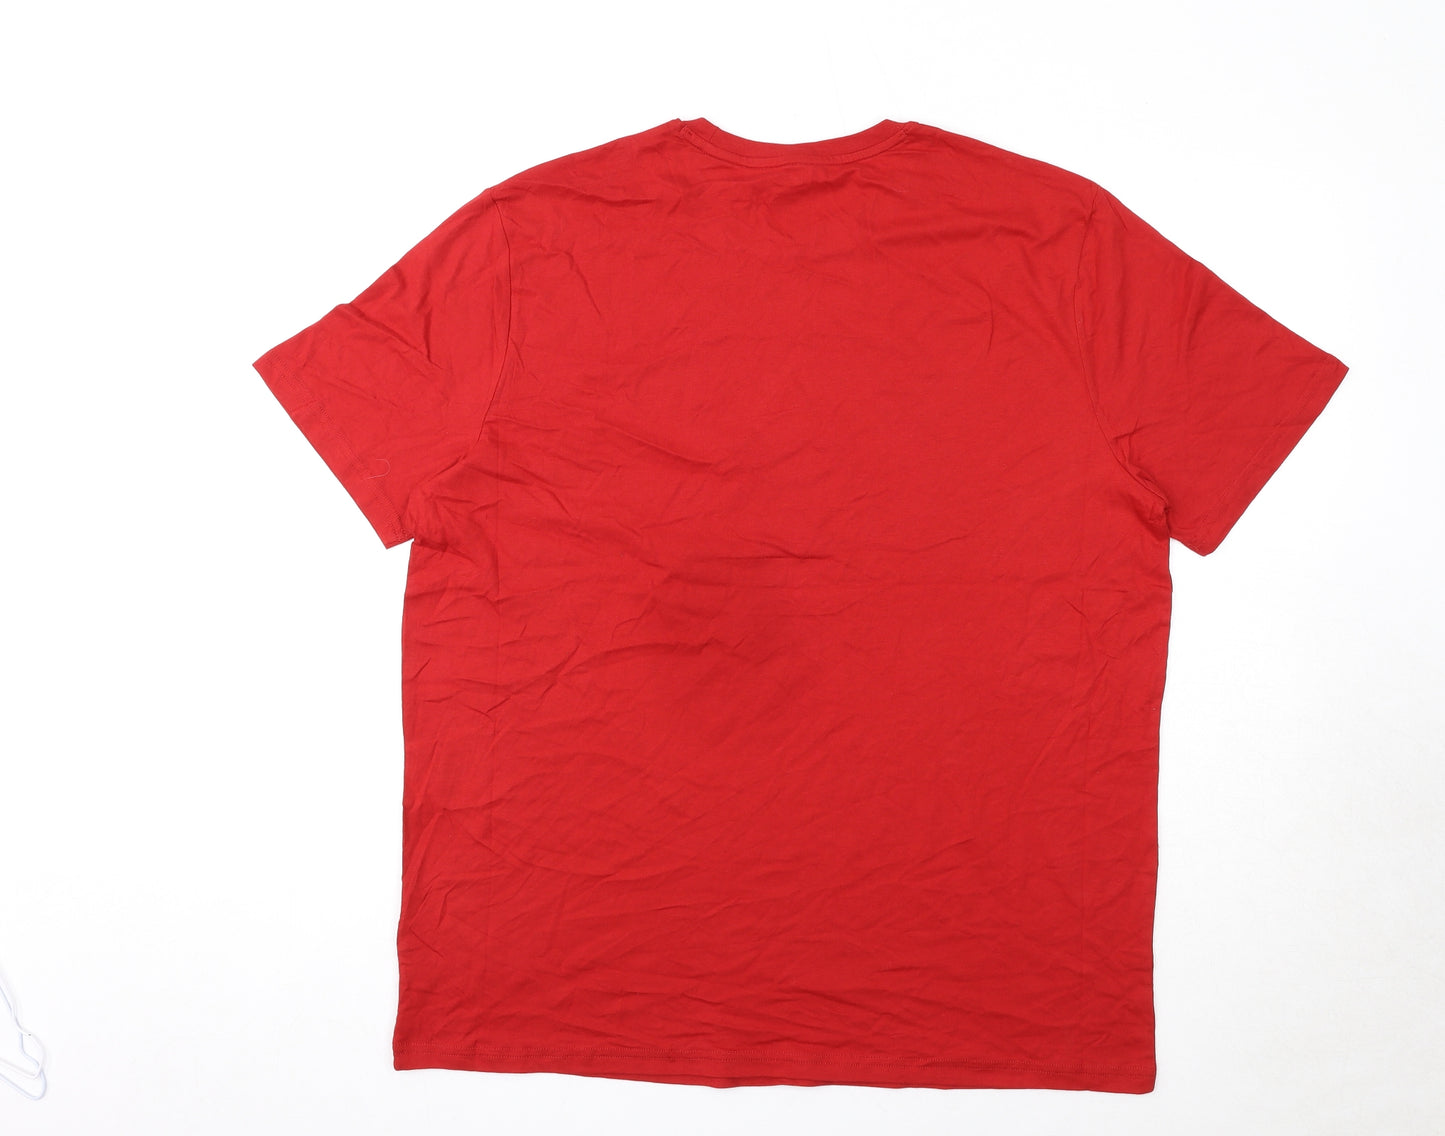 Marks and Spencer Mens Red Cotton T-Shirt Size XL Crew Neck Pullover - Merry Christmas Brew-Dolph Reindeer